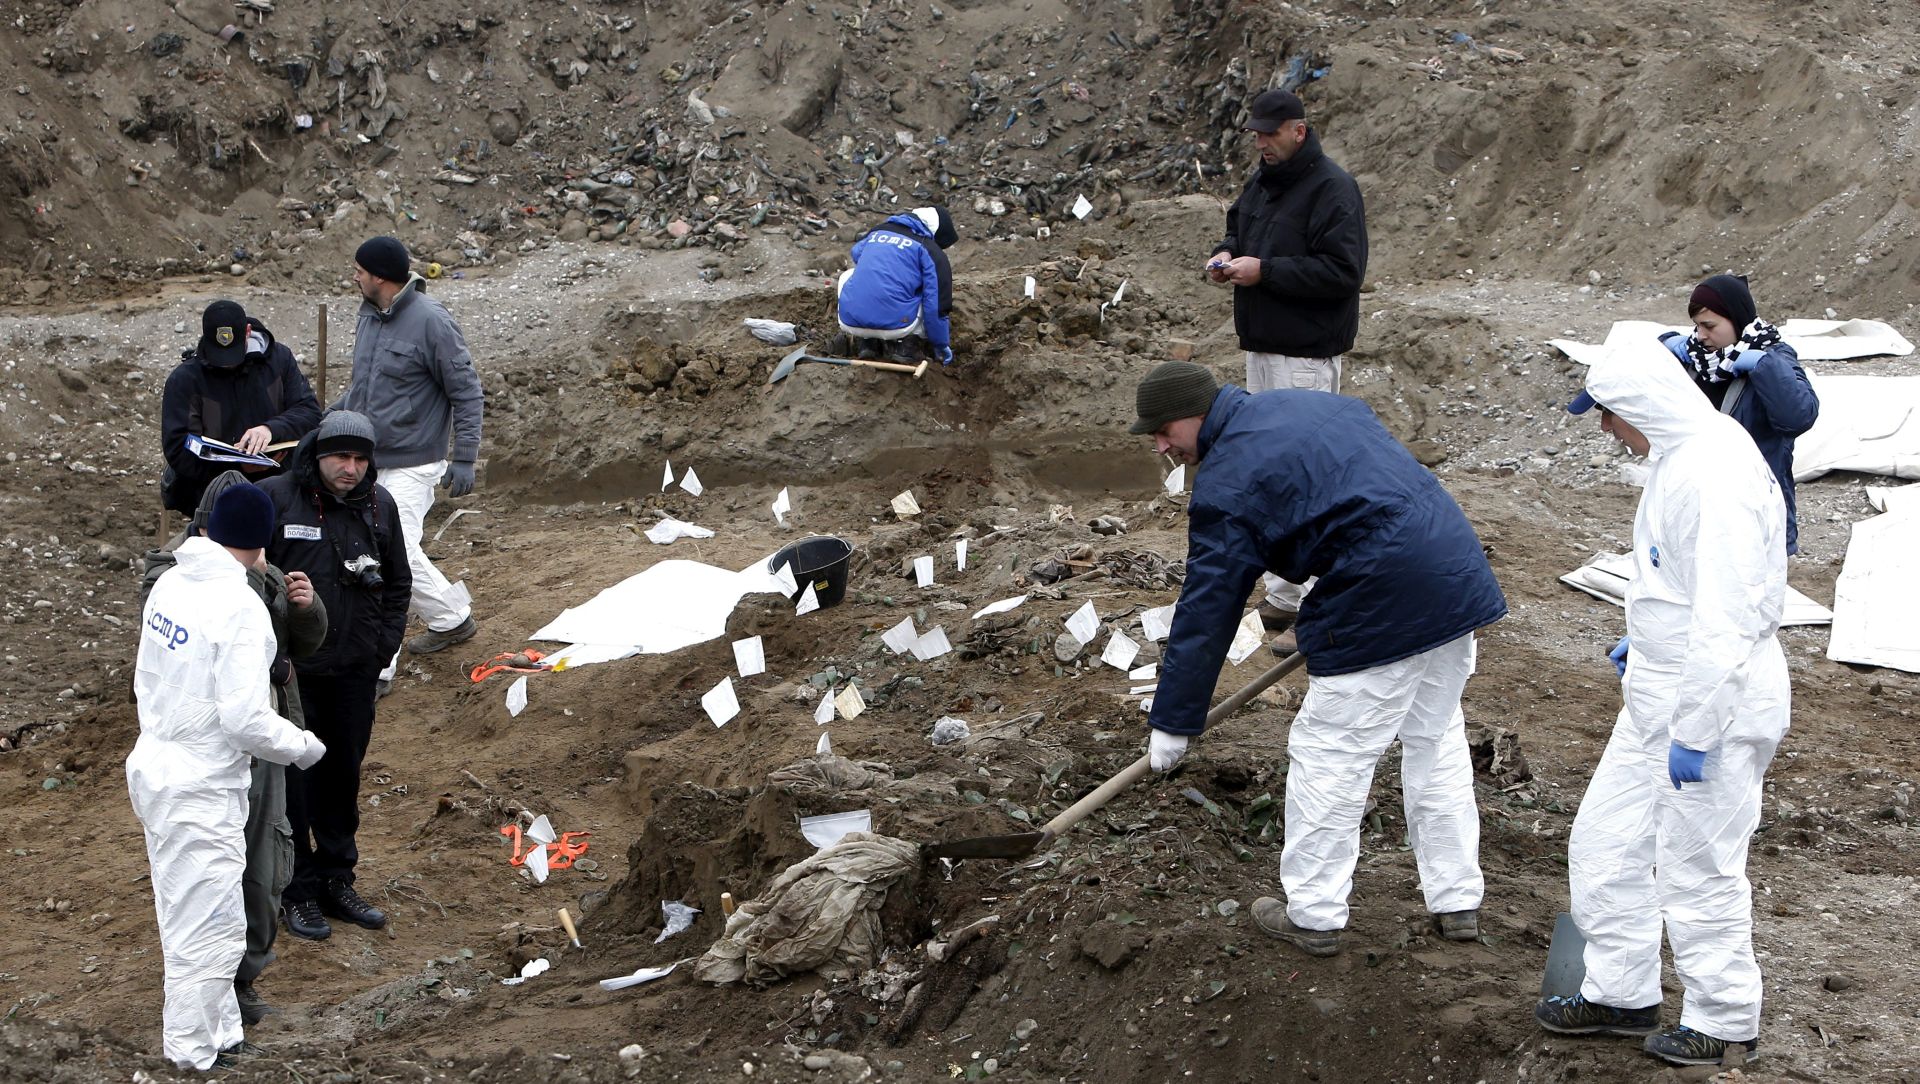 epa05069814 Forensic experts examine a mass grave in Kozluk, northeast Bosnia, 170 km from Sarajevo,  Bosnia and Herzegovina, 15 December 2015, near the site of the notorious Srebrenica massacre in 1995. The remains of several people have already been found in the grave which is believed to contain even more bodies. More than 8,000 Bosnian Muslims were killed by Serbian forces after the fall of Srebrenica 1995, which is regarded a war crime and the worst massacre in Europe since World War II.  EPA/FEHIM DEMIR